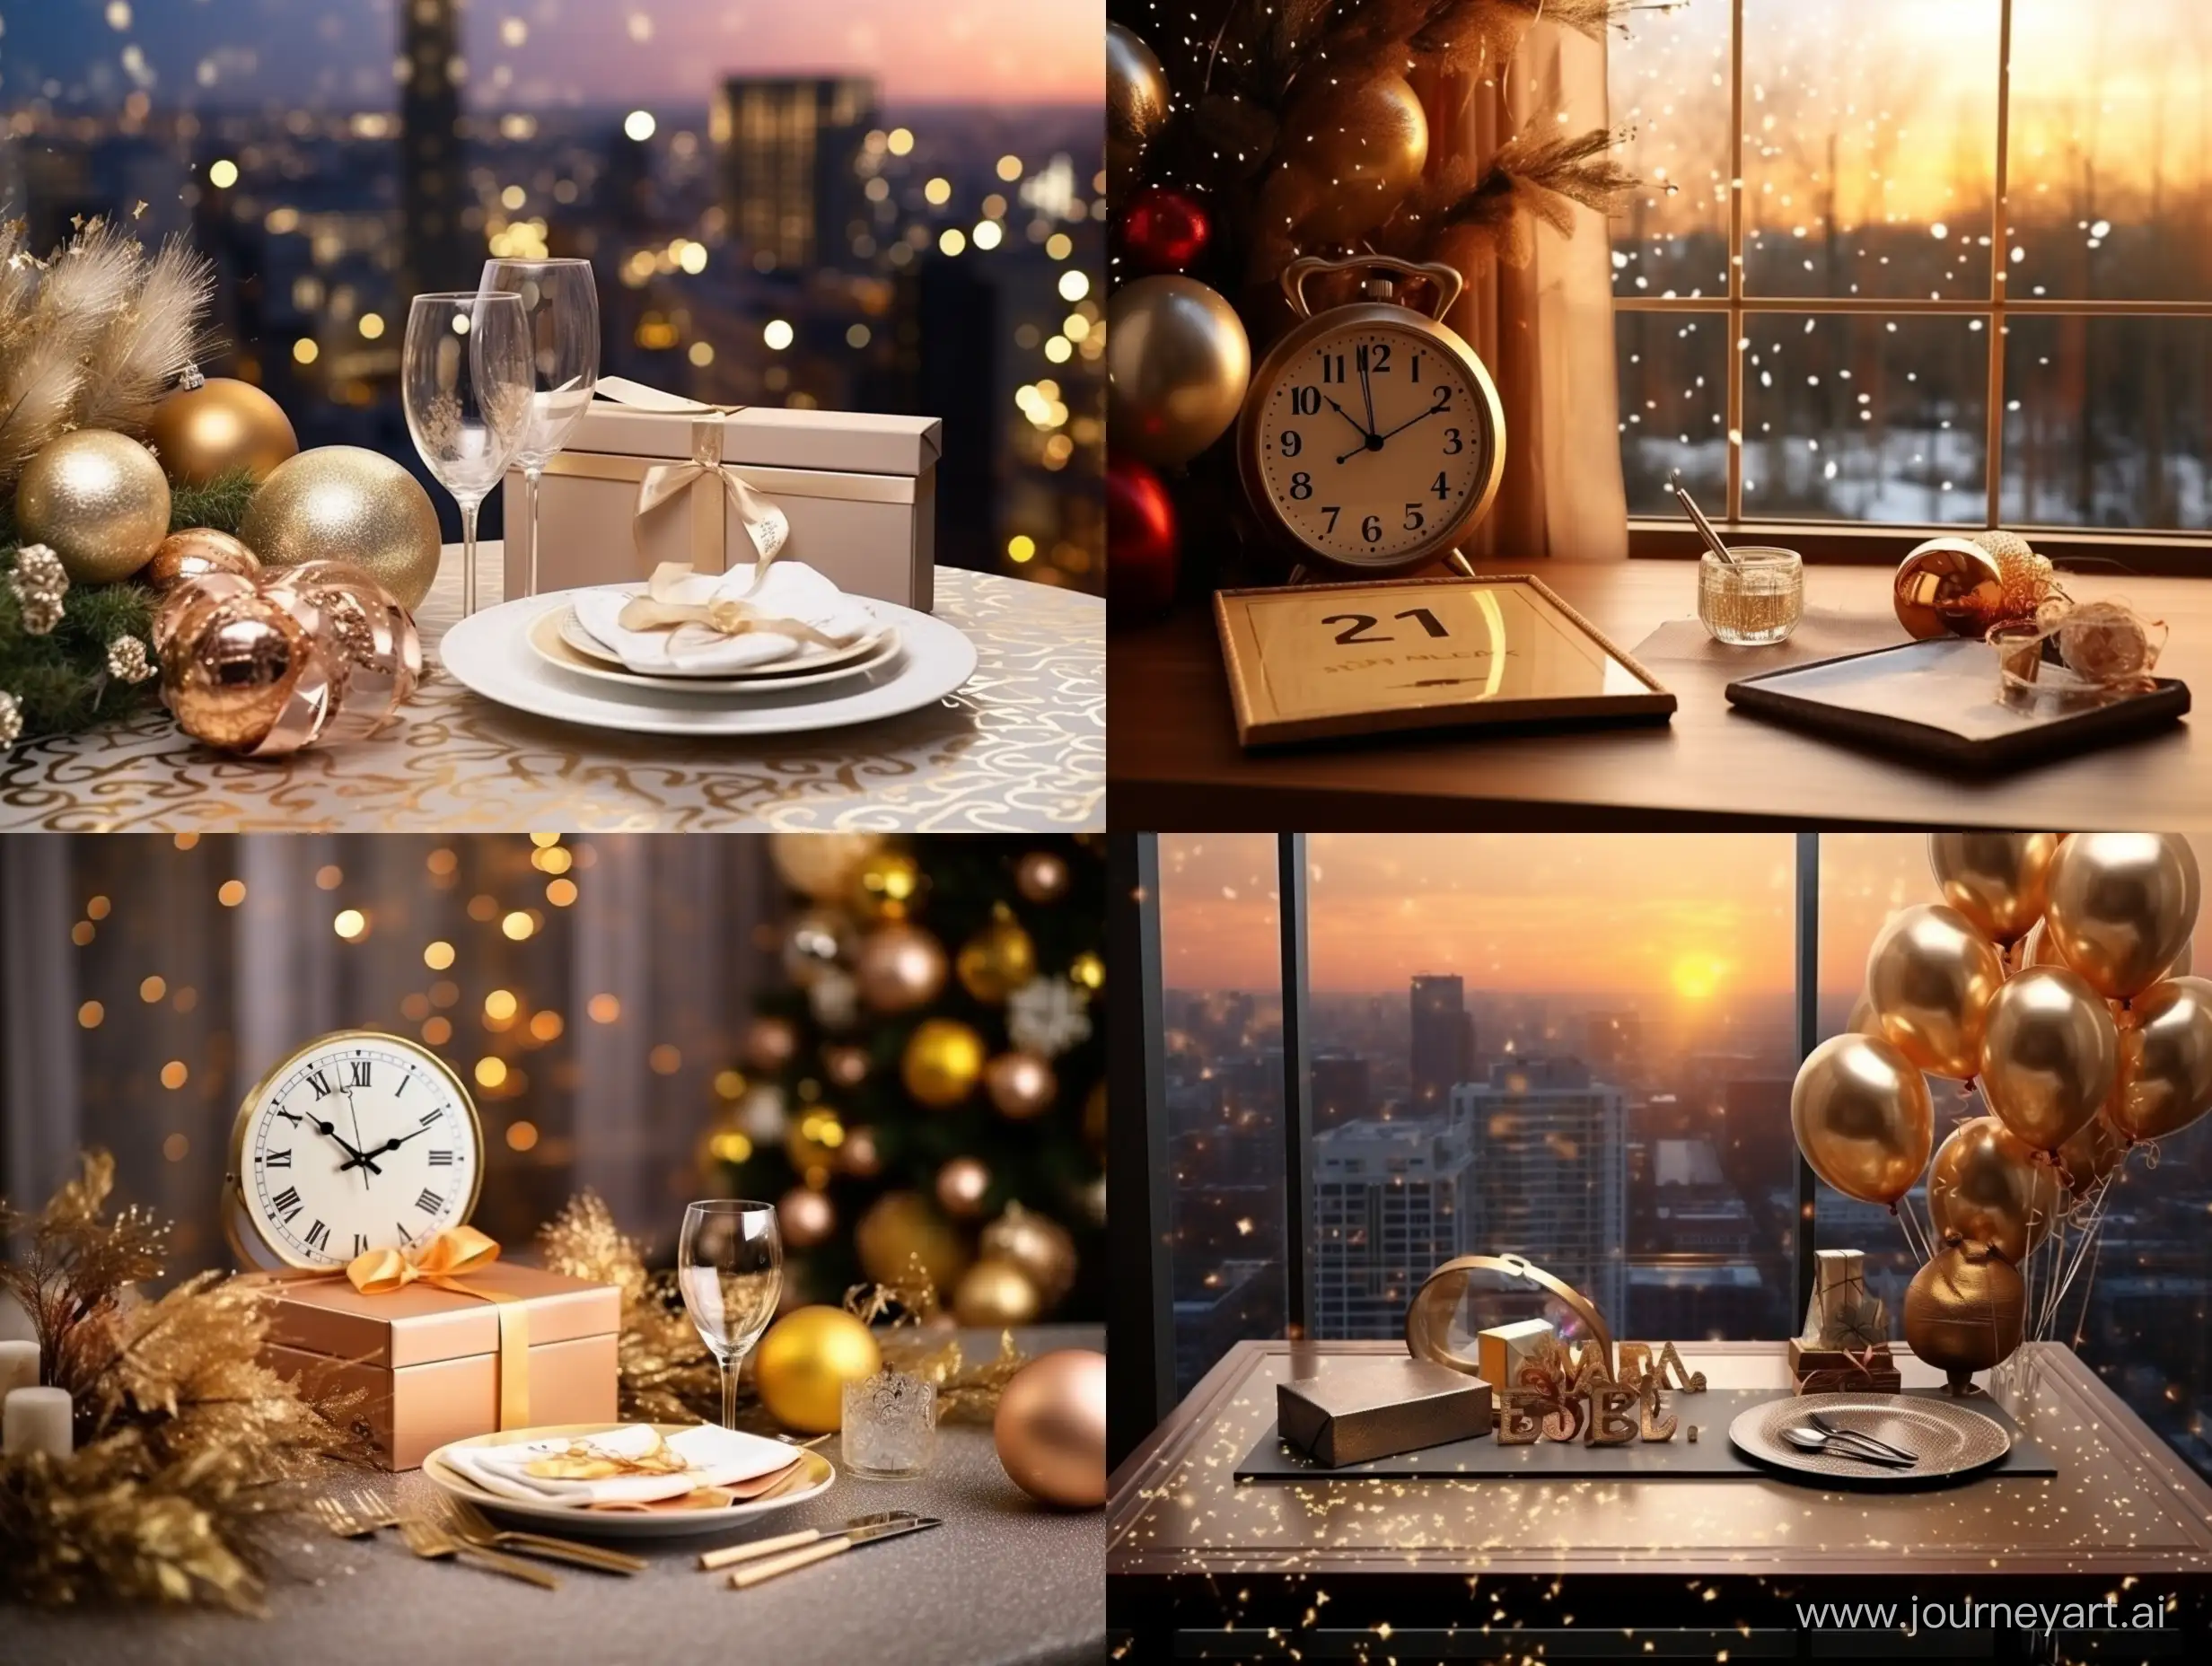 Elegant-New-Years-Table-Setting-with-Golden-Decor-and-Open-Book